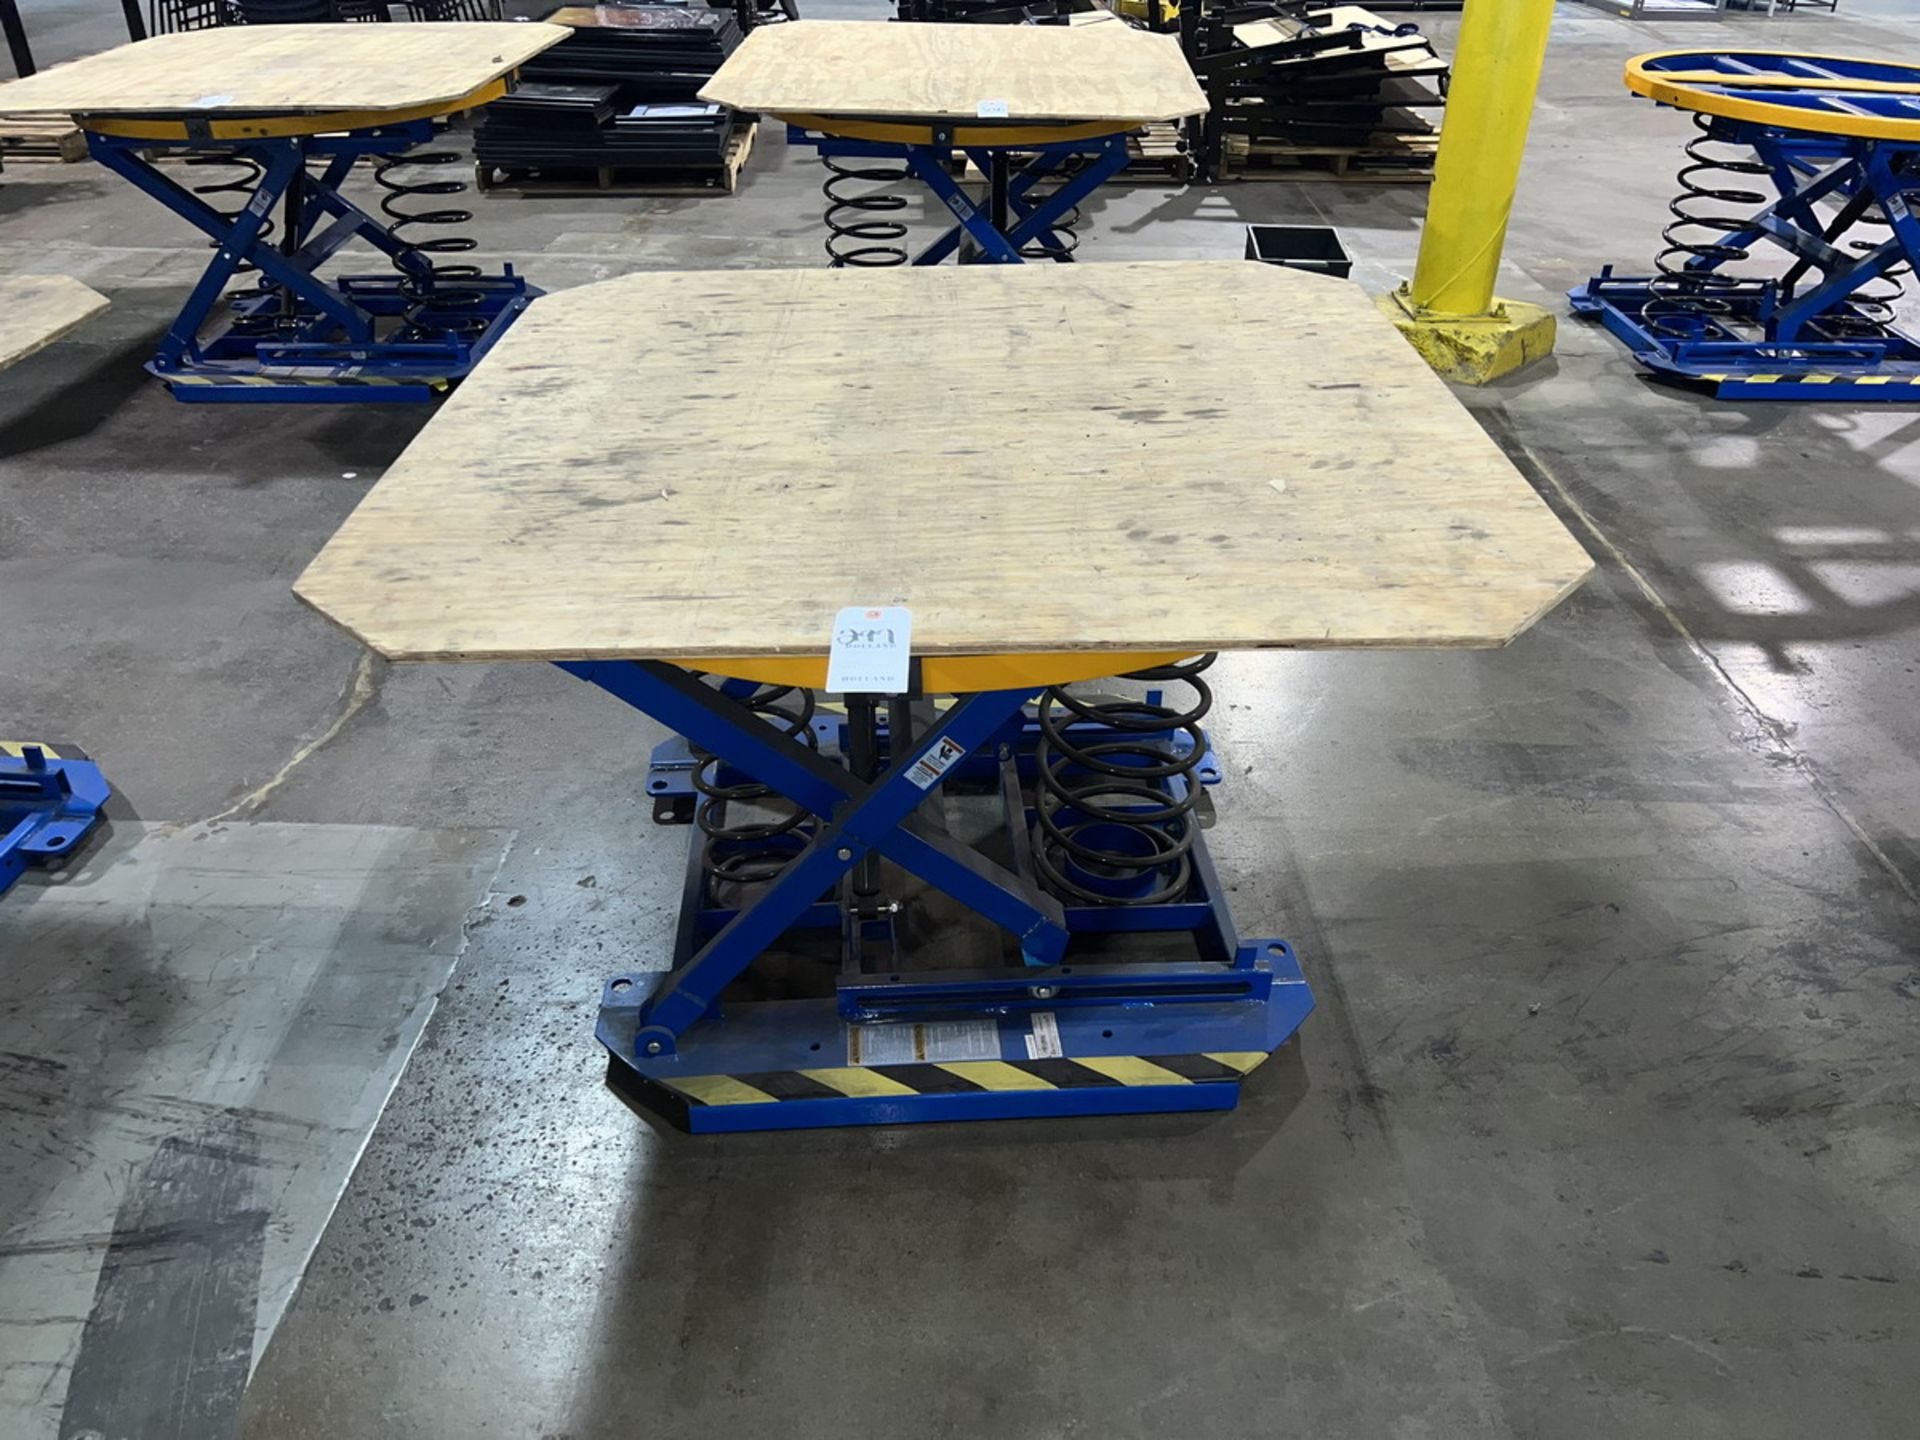 Global 4500Lb. 44" Spring Loaded Rotary Lift Table